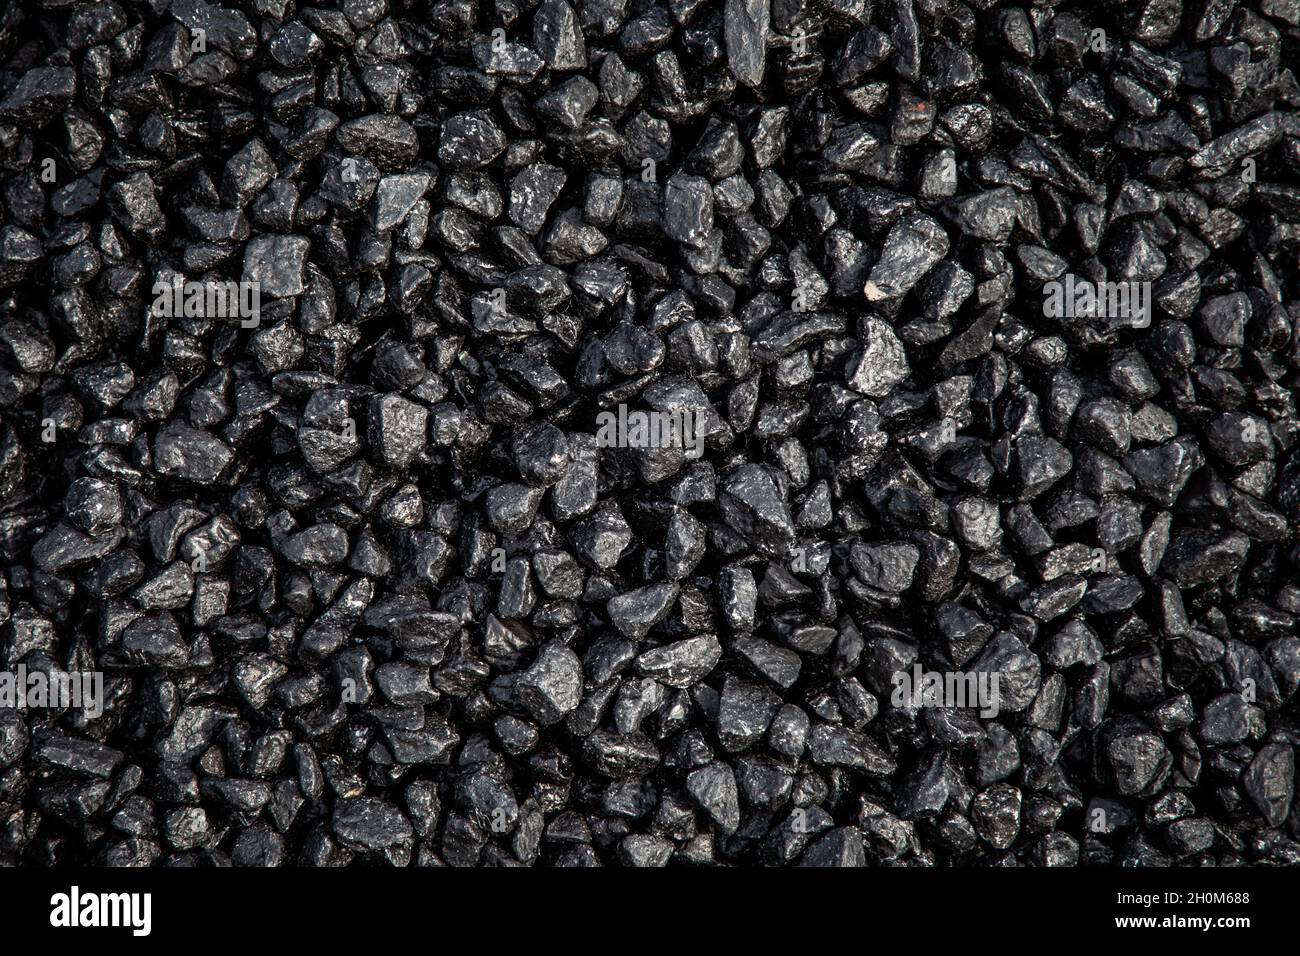 A pile of fresh tarmacadam asphalt waiting to be laid on a road surface Stock Photo